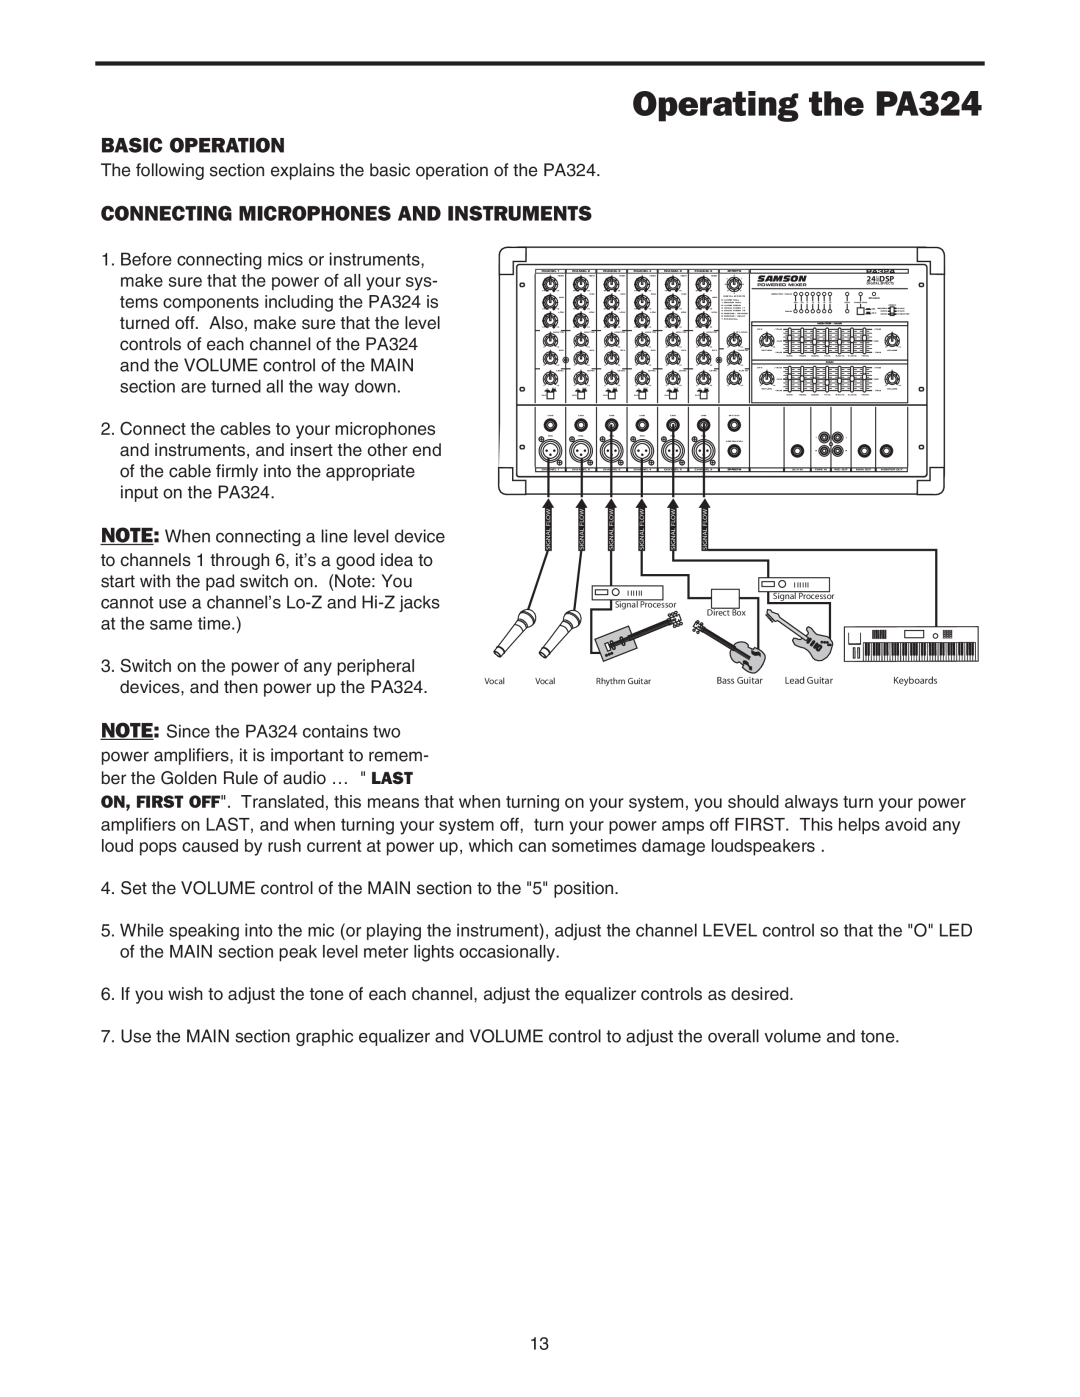 Samson owner manual Operating the PA324, Basic Operation, Connecting Microphones And Instruments 